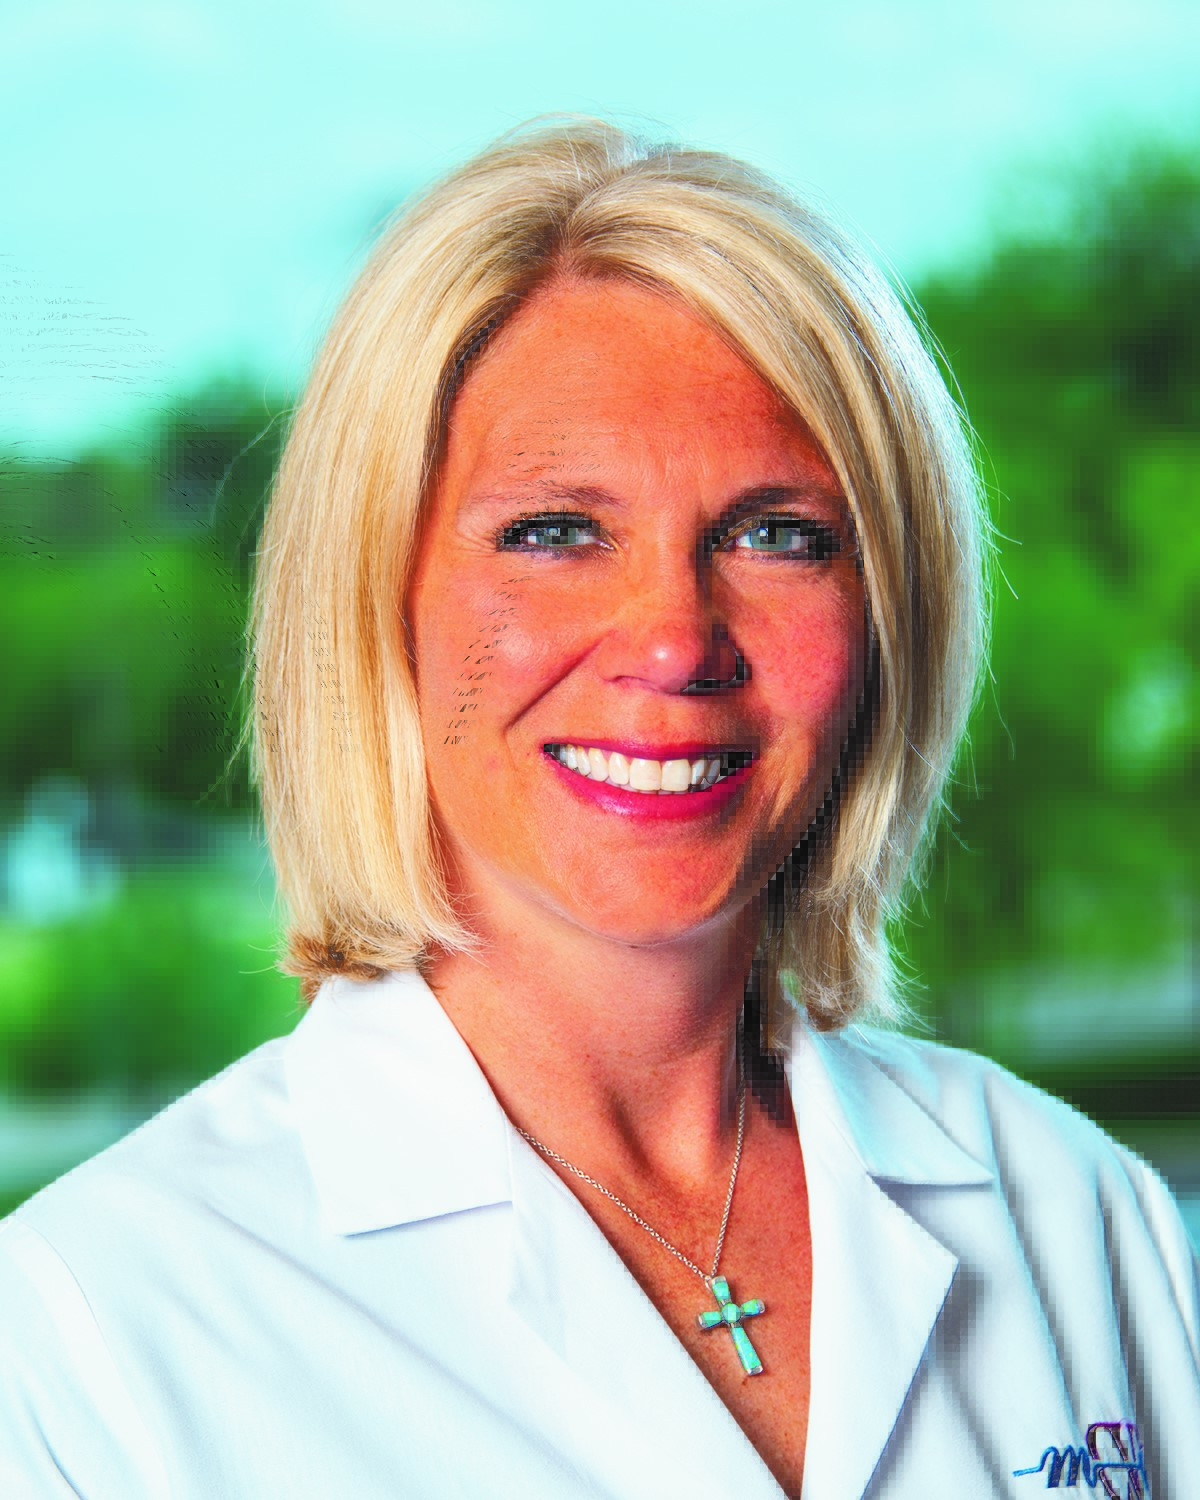 Carrie Reif-Busman, PA-C – An Independent Provider of Memorial Healthcare